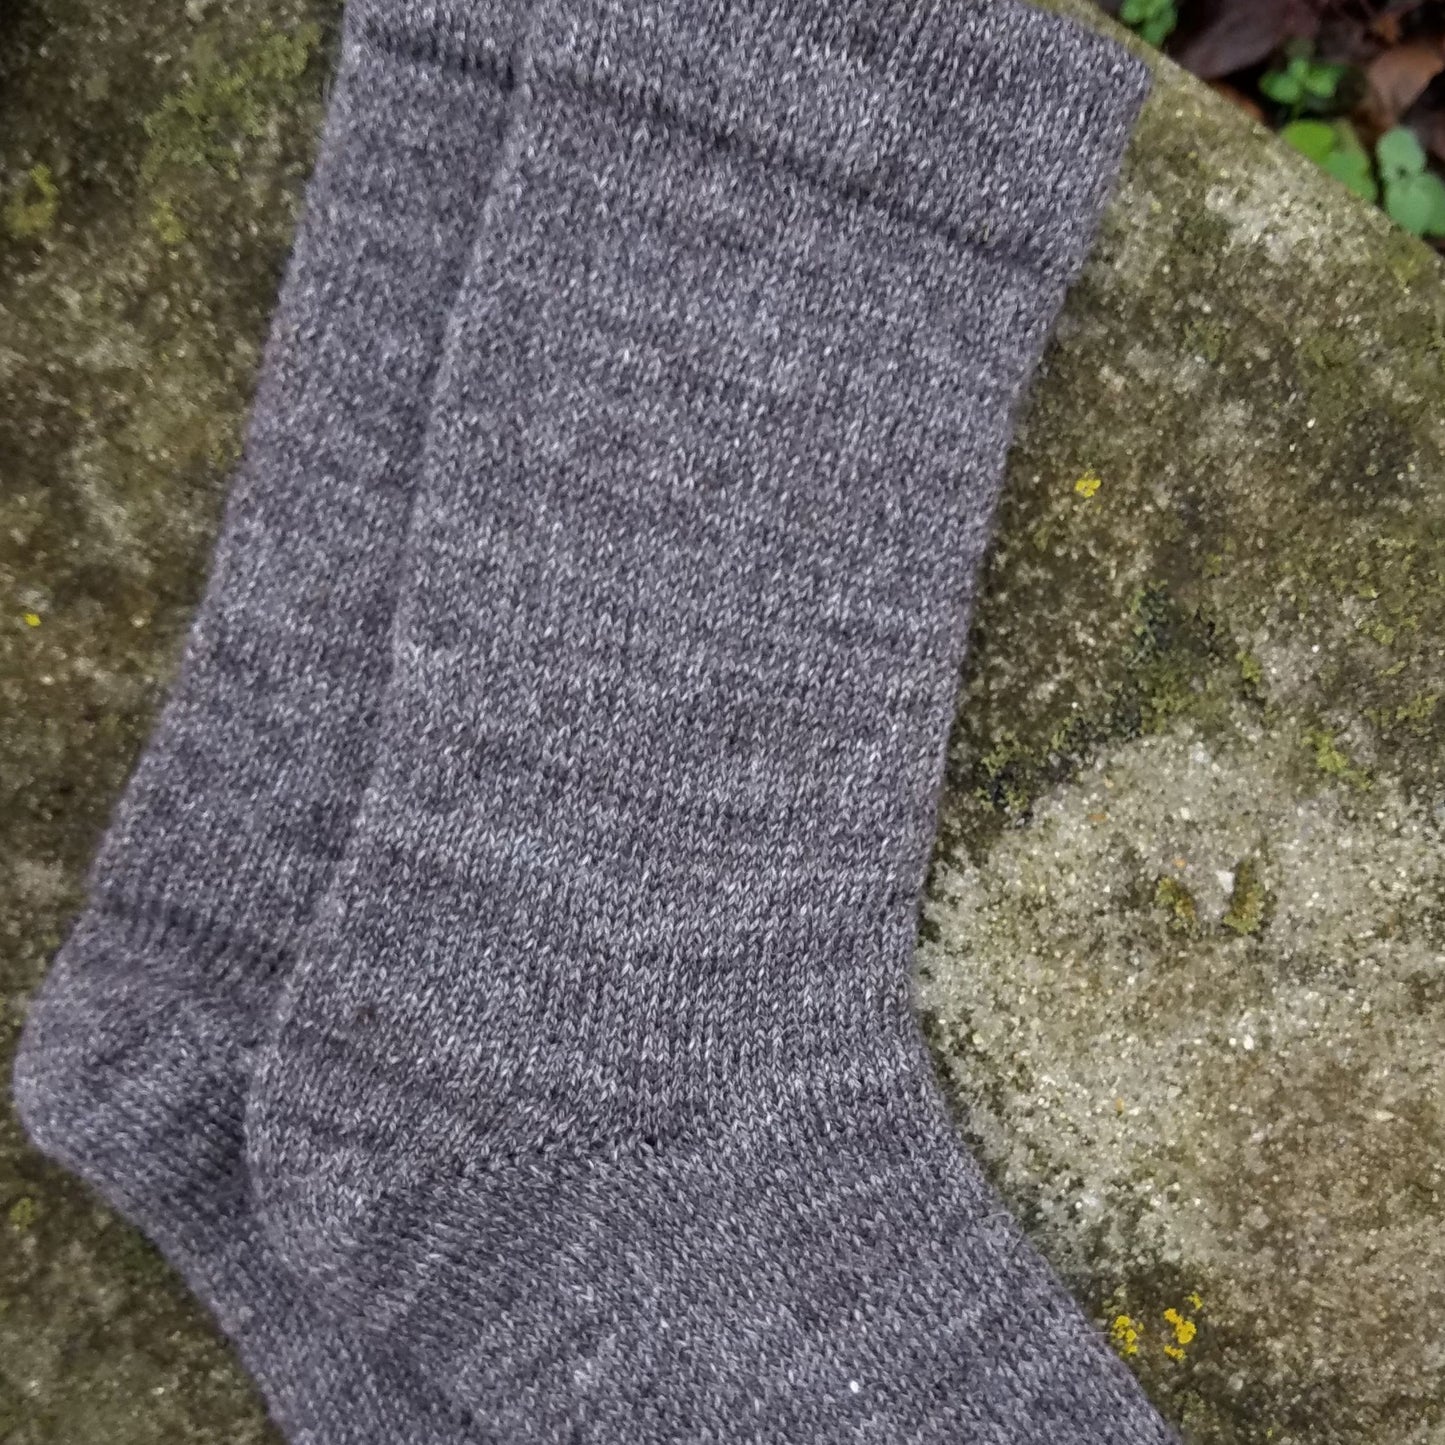 United States, Kathleen Oliver / Sweet Tree Hill Farm, Shepherd’s Socks: The Shadow Trio Collection